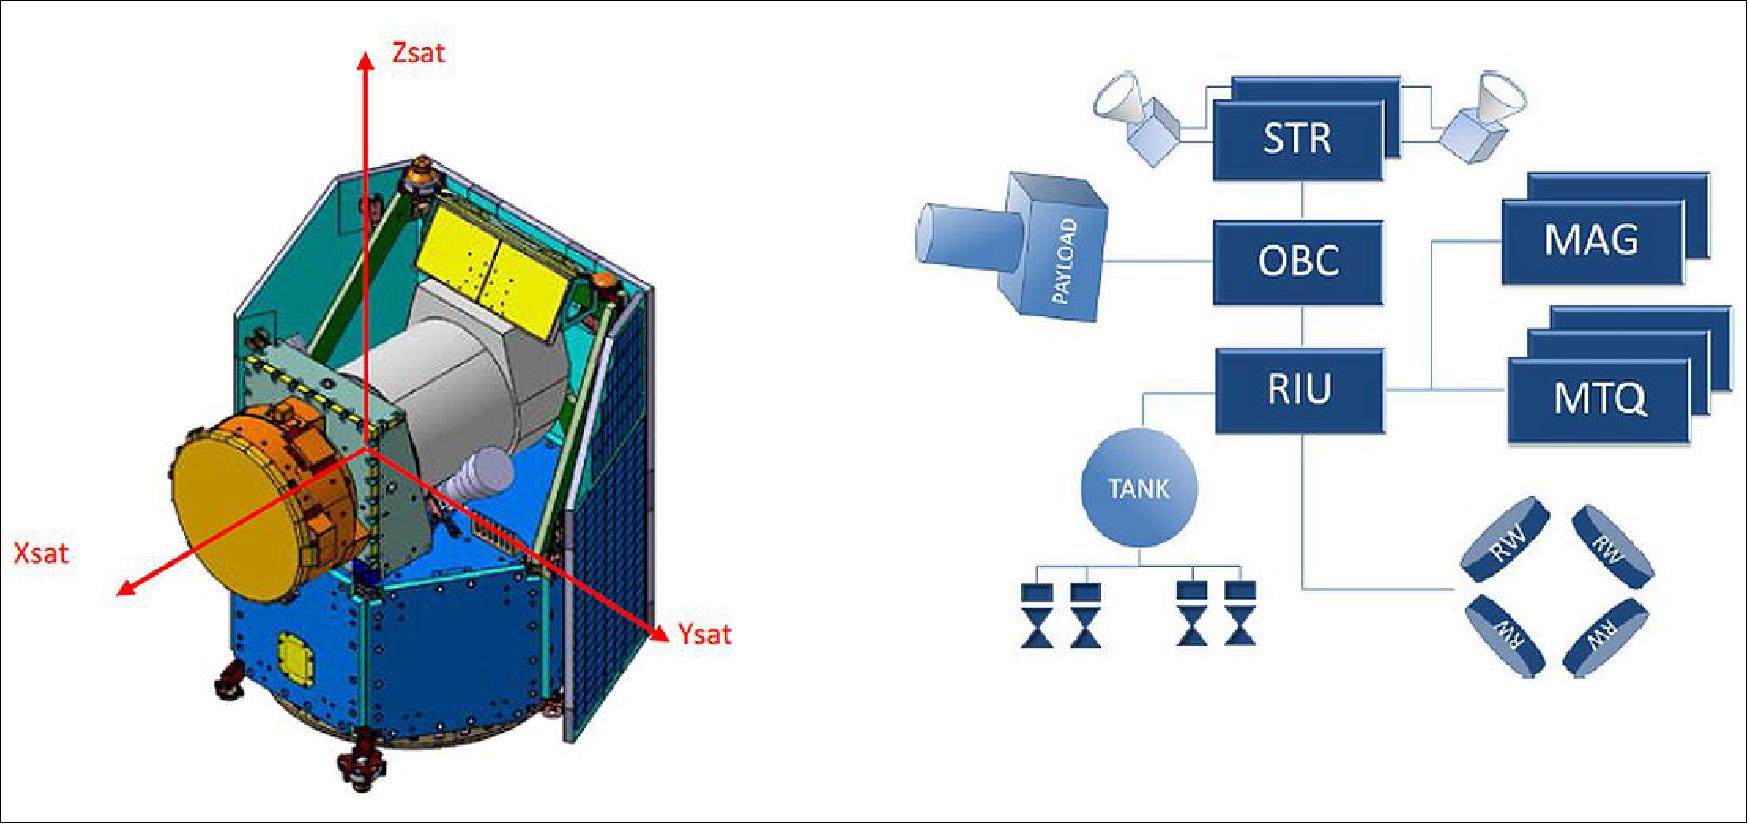 Figure 9: CHEOPS satellite (left)) and AOCS architecture (right), image credit: Airbus DS